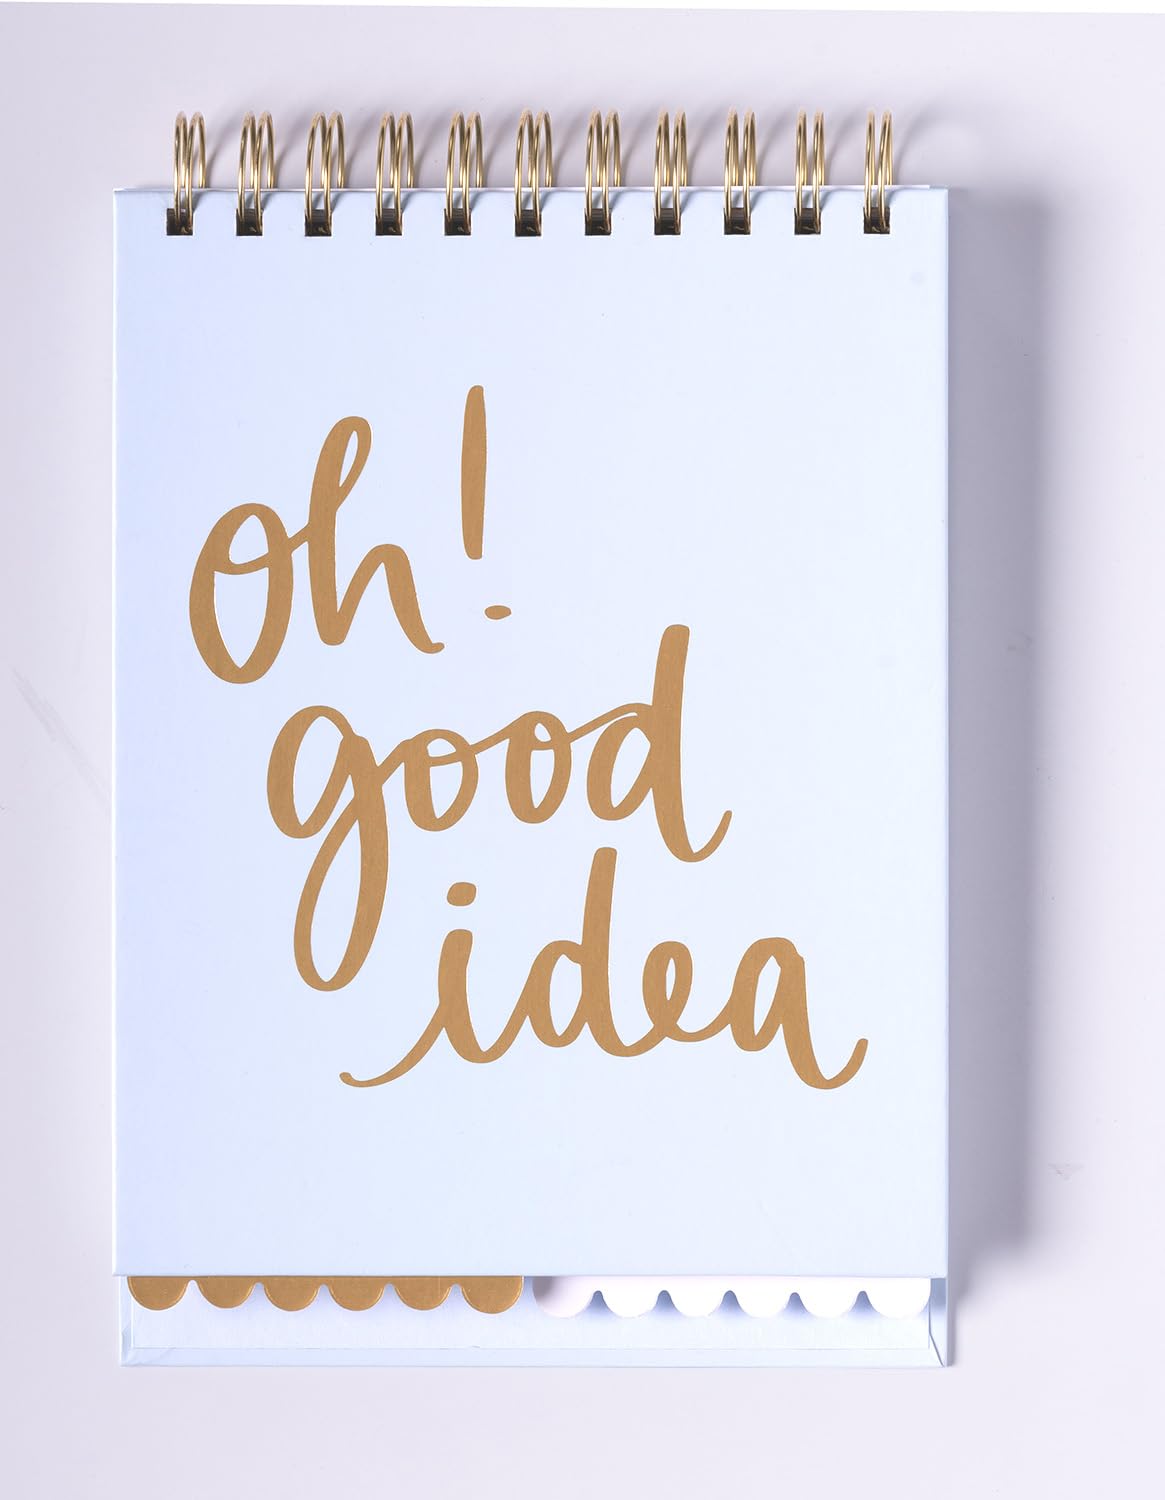 To Do List Pad with Exposed Divider Tabs for School, College or Work